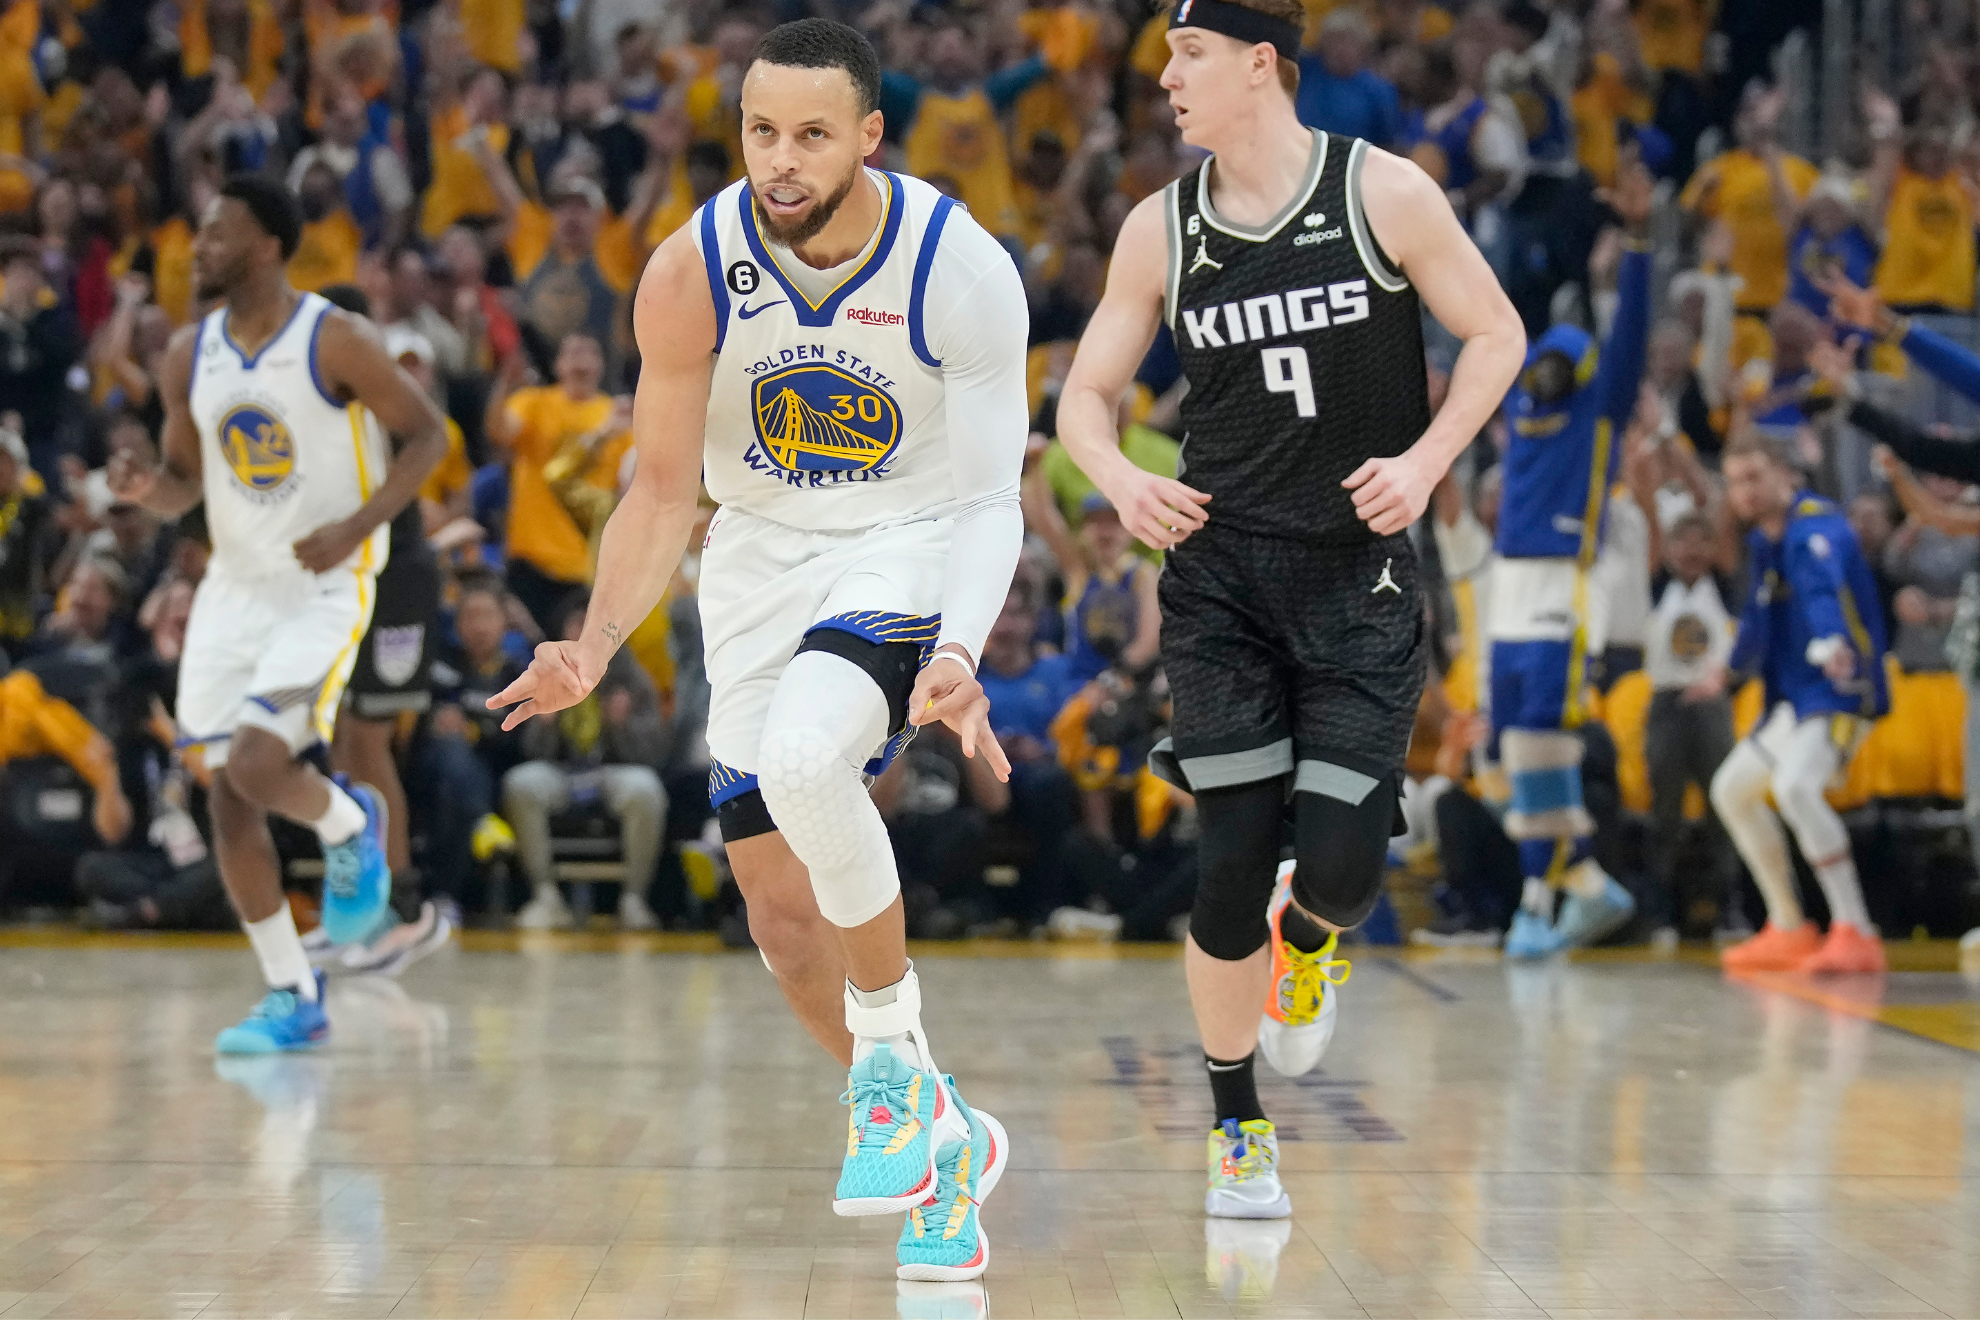 Stephen Curry dropped a team-high 32 points as the Warriors evened their series with the Kings.